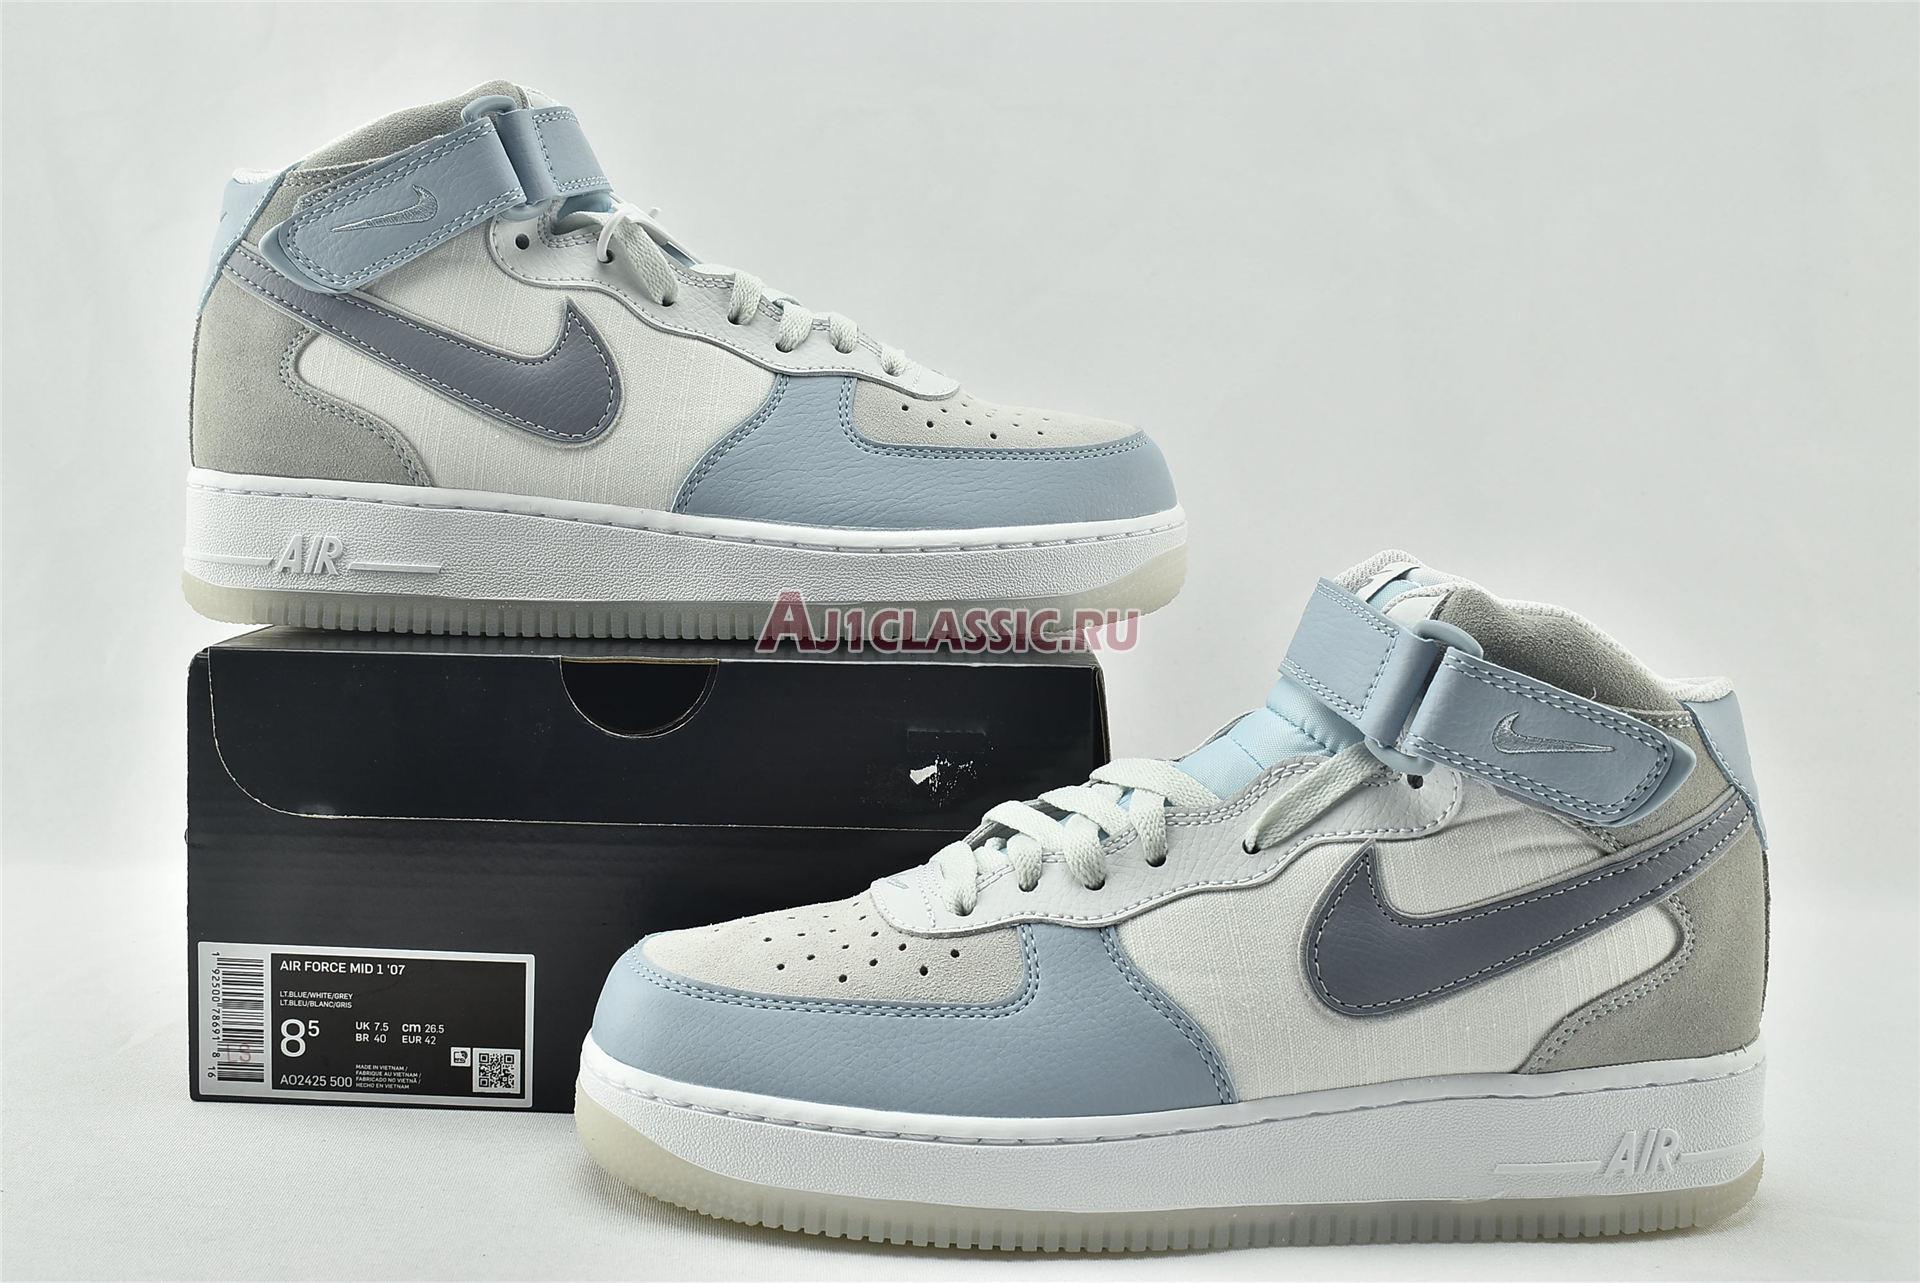 Nike Air Force 1 High 07 LV8 Light Armory Blue AO2425-500 Light Armory Blue/Obsidian Mist-Off White Sneakers